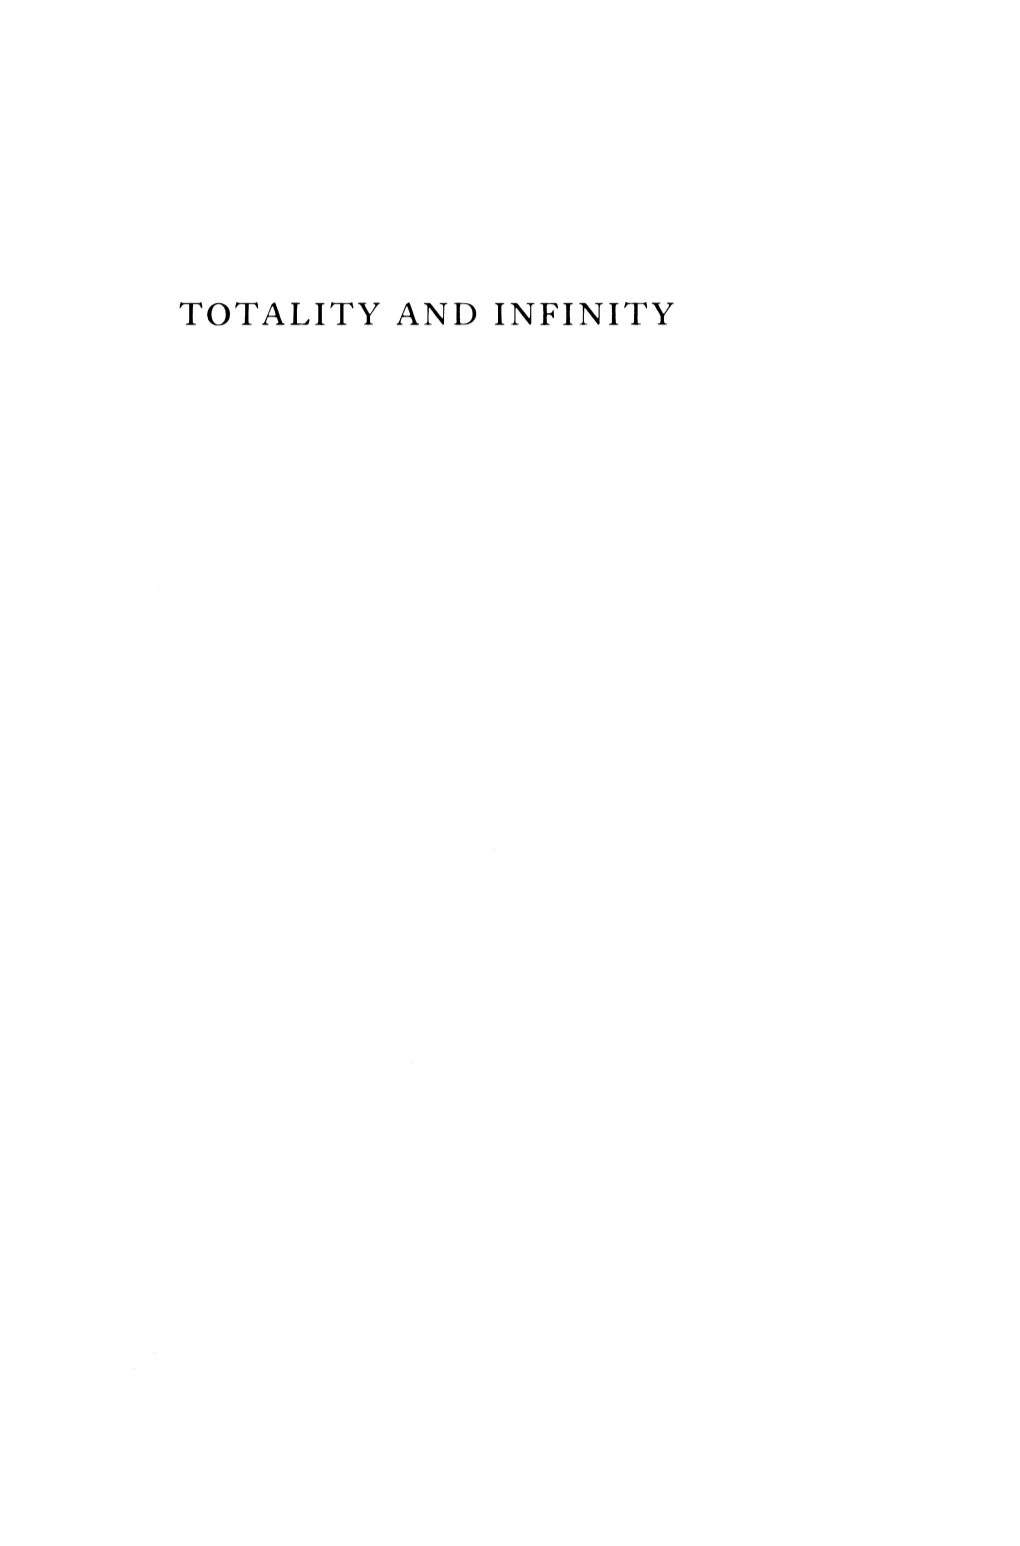 Totality and Infinity Tot Ality and Infinity an Essa Y on Exteriority